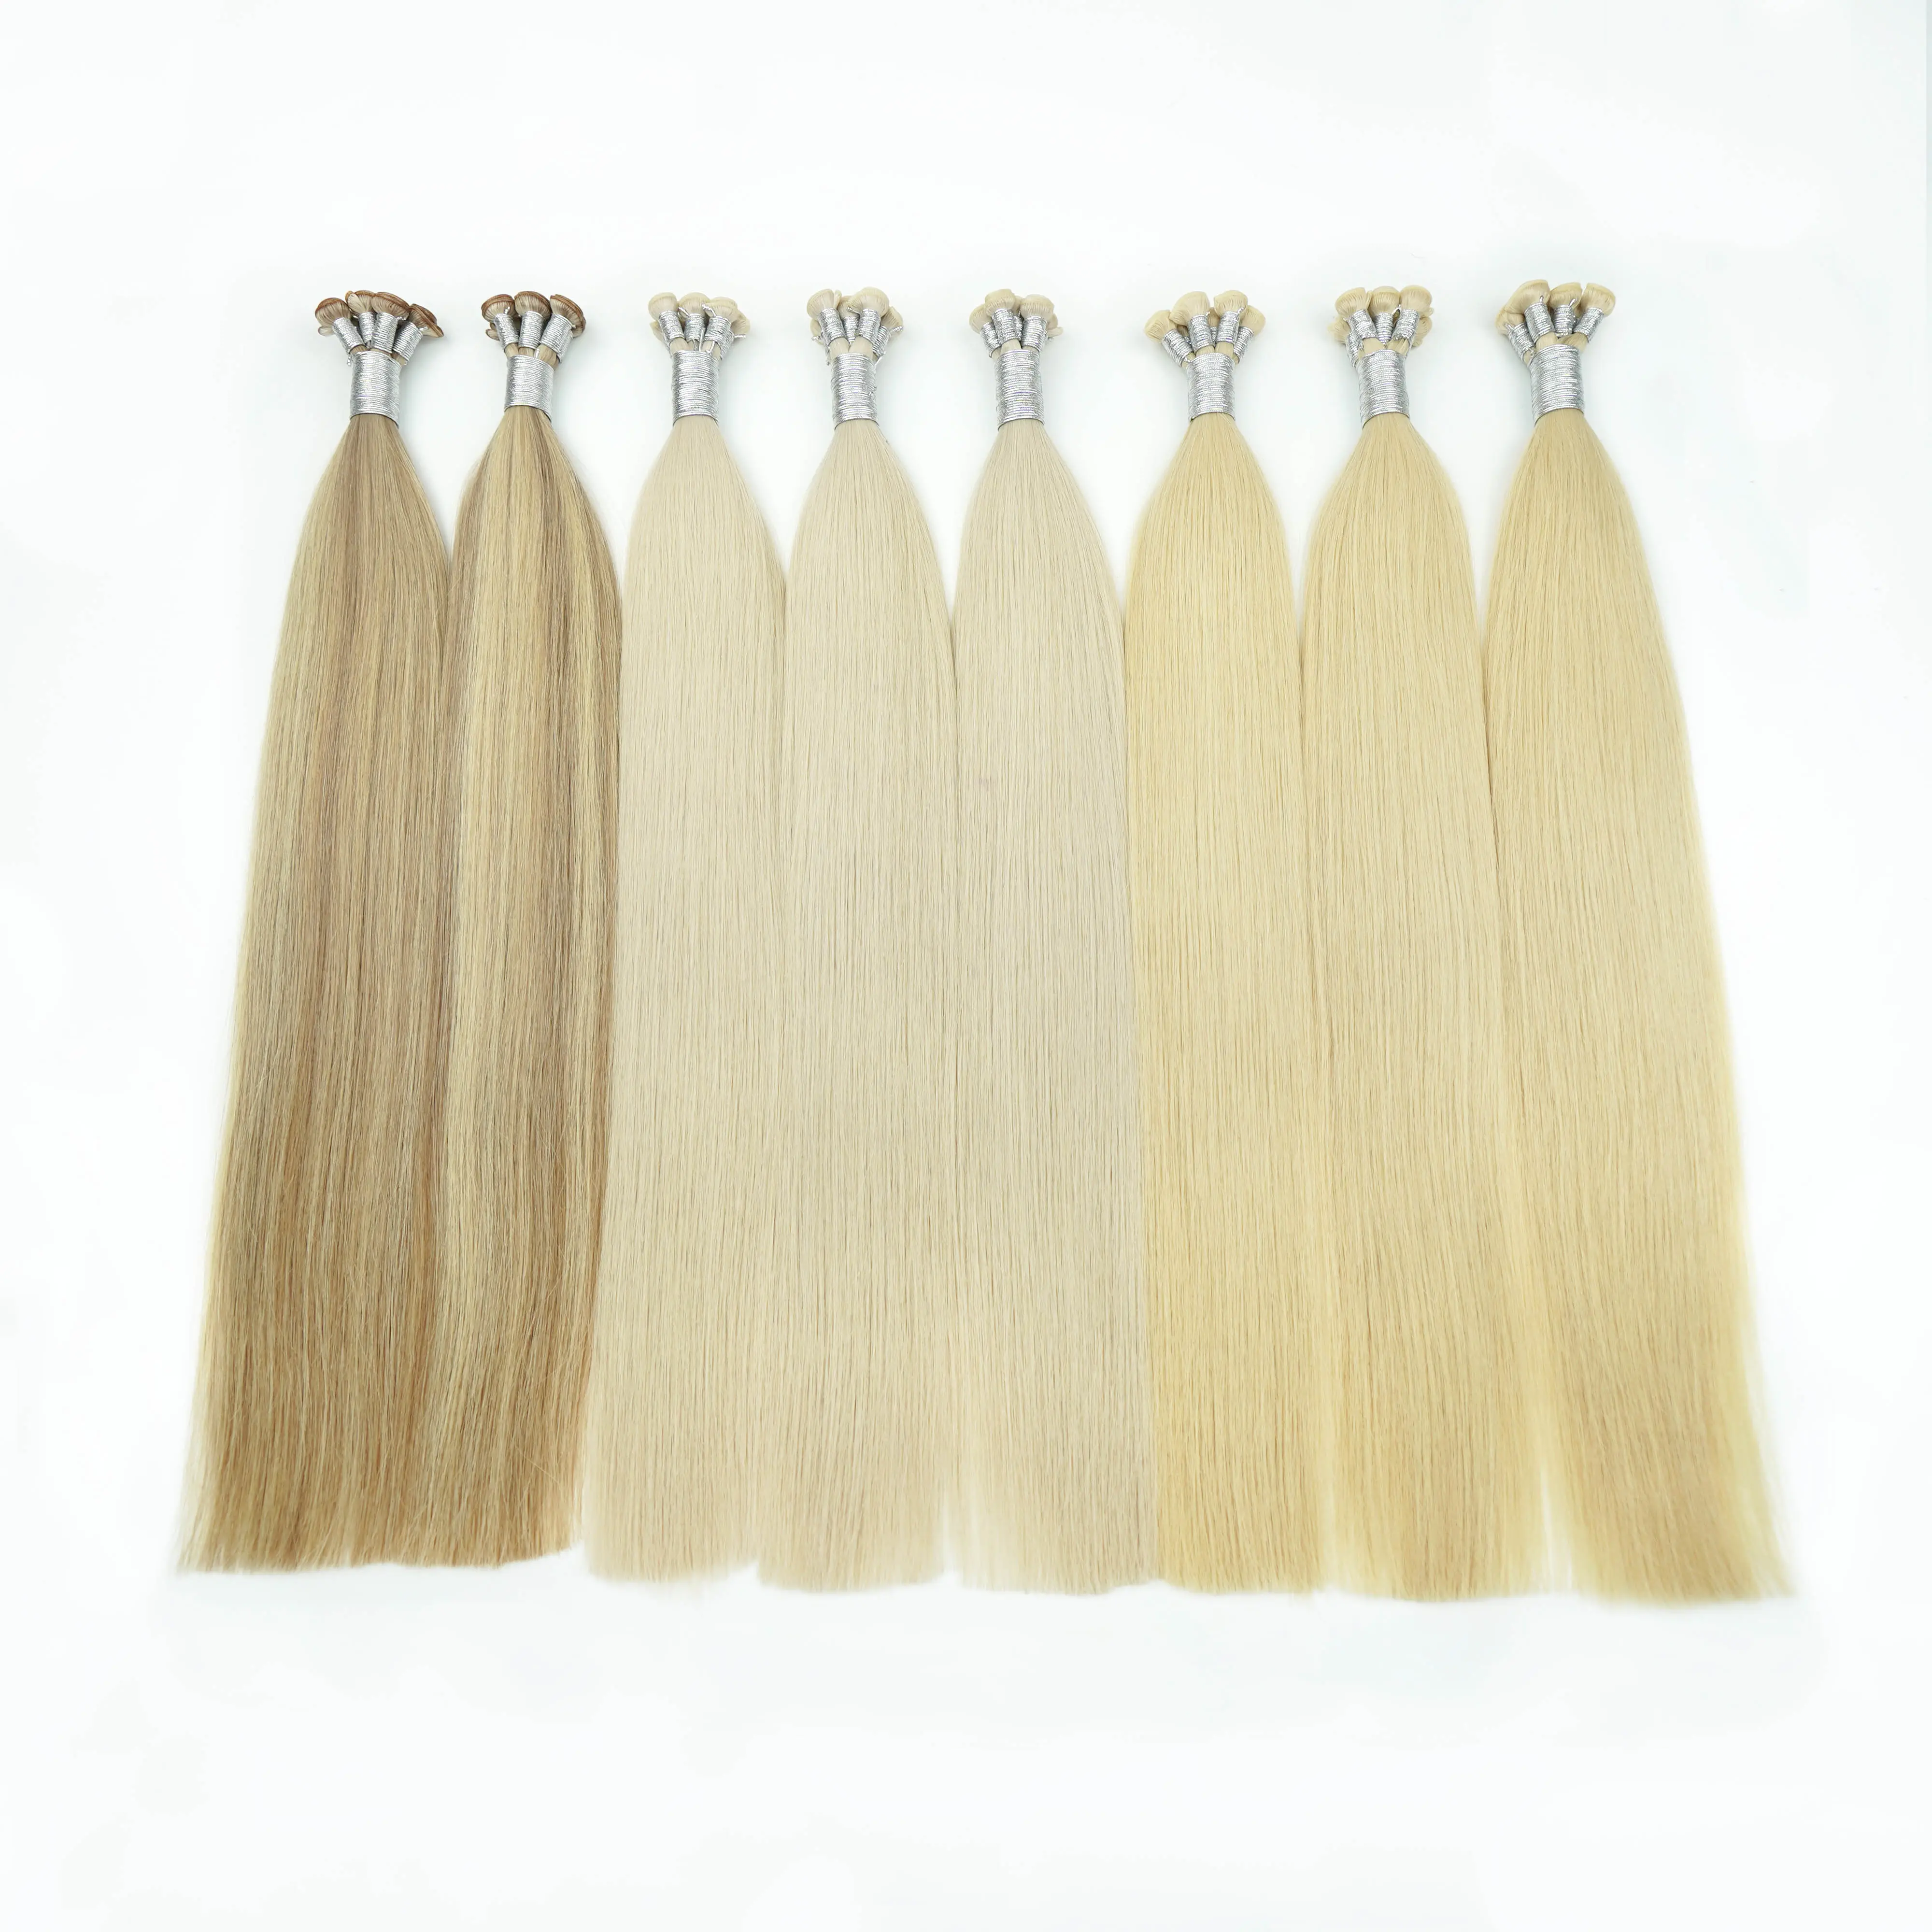 New Genius Weft Knitted Light Golden Natural Human Hair Extensions Dual Wave 100cm Remy Hair Grade Straight Style